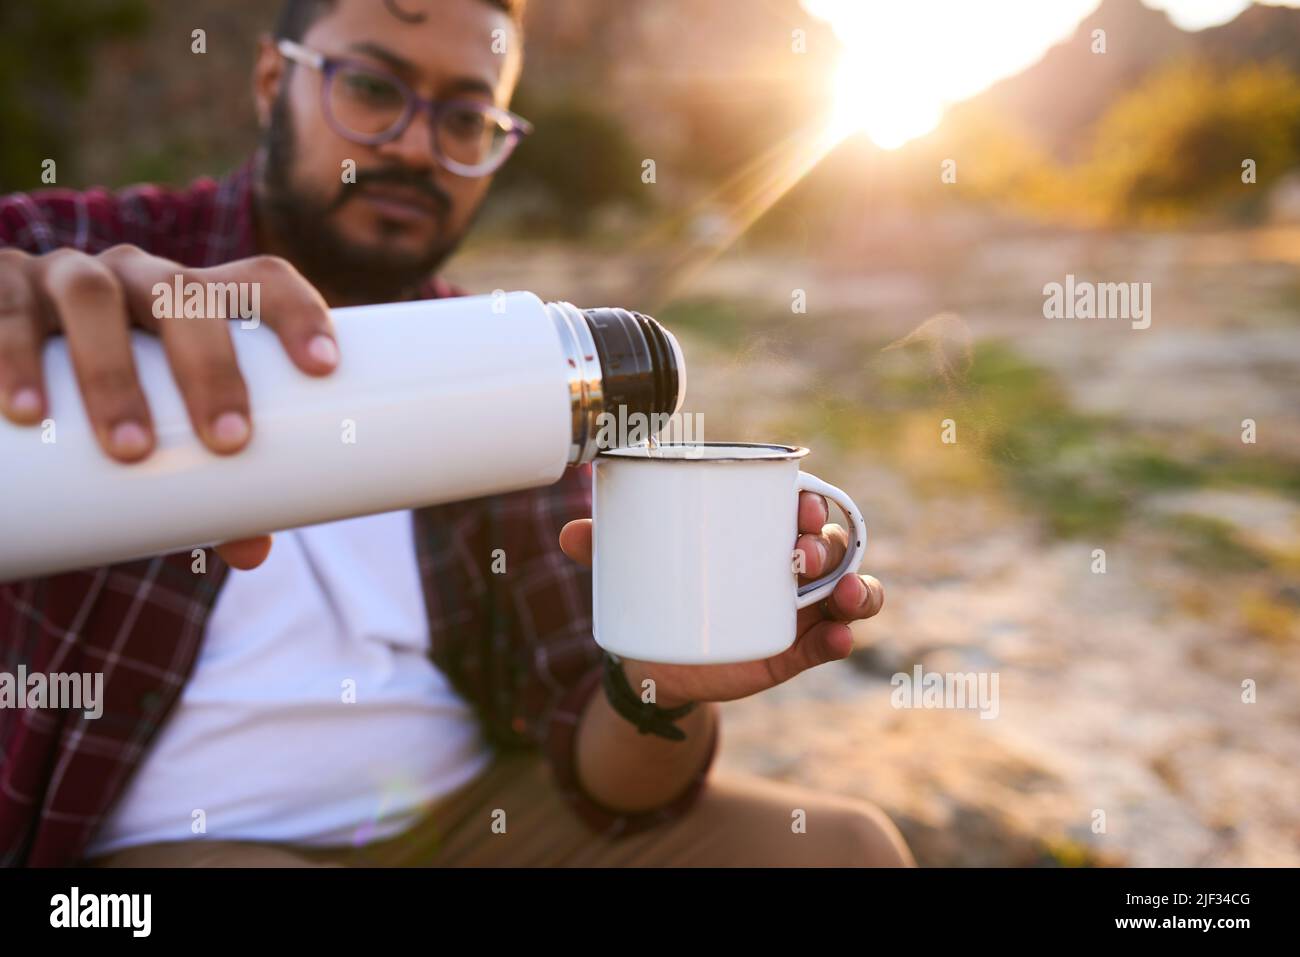 Close-up of Man Holding Thermos and an Iron Mug, Pouring Hot Tea